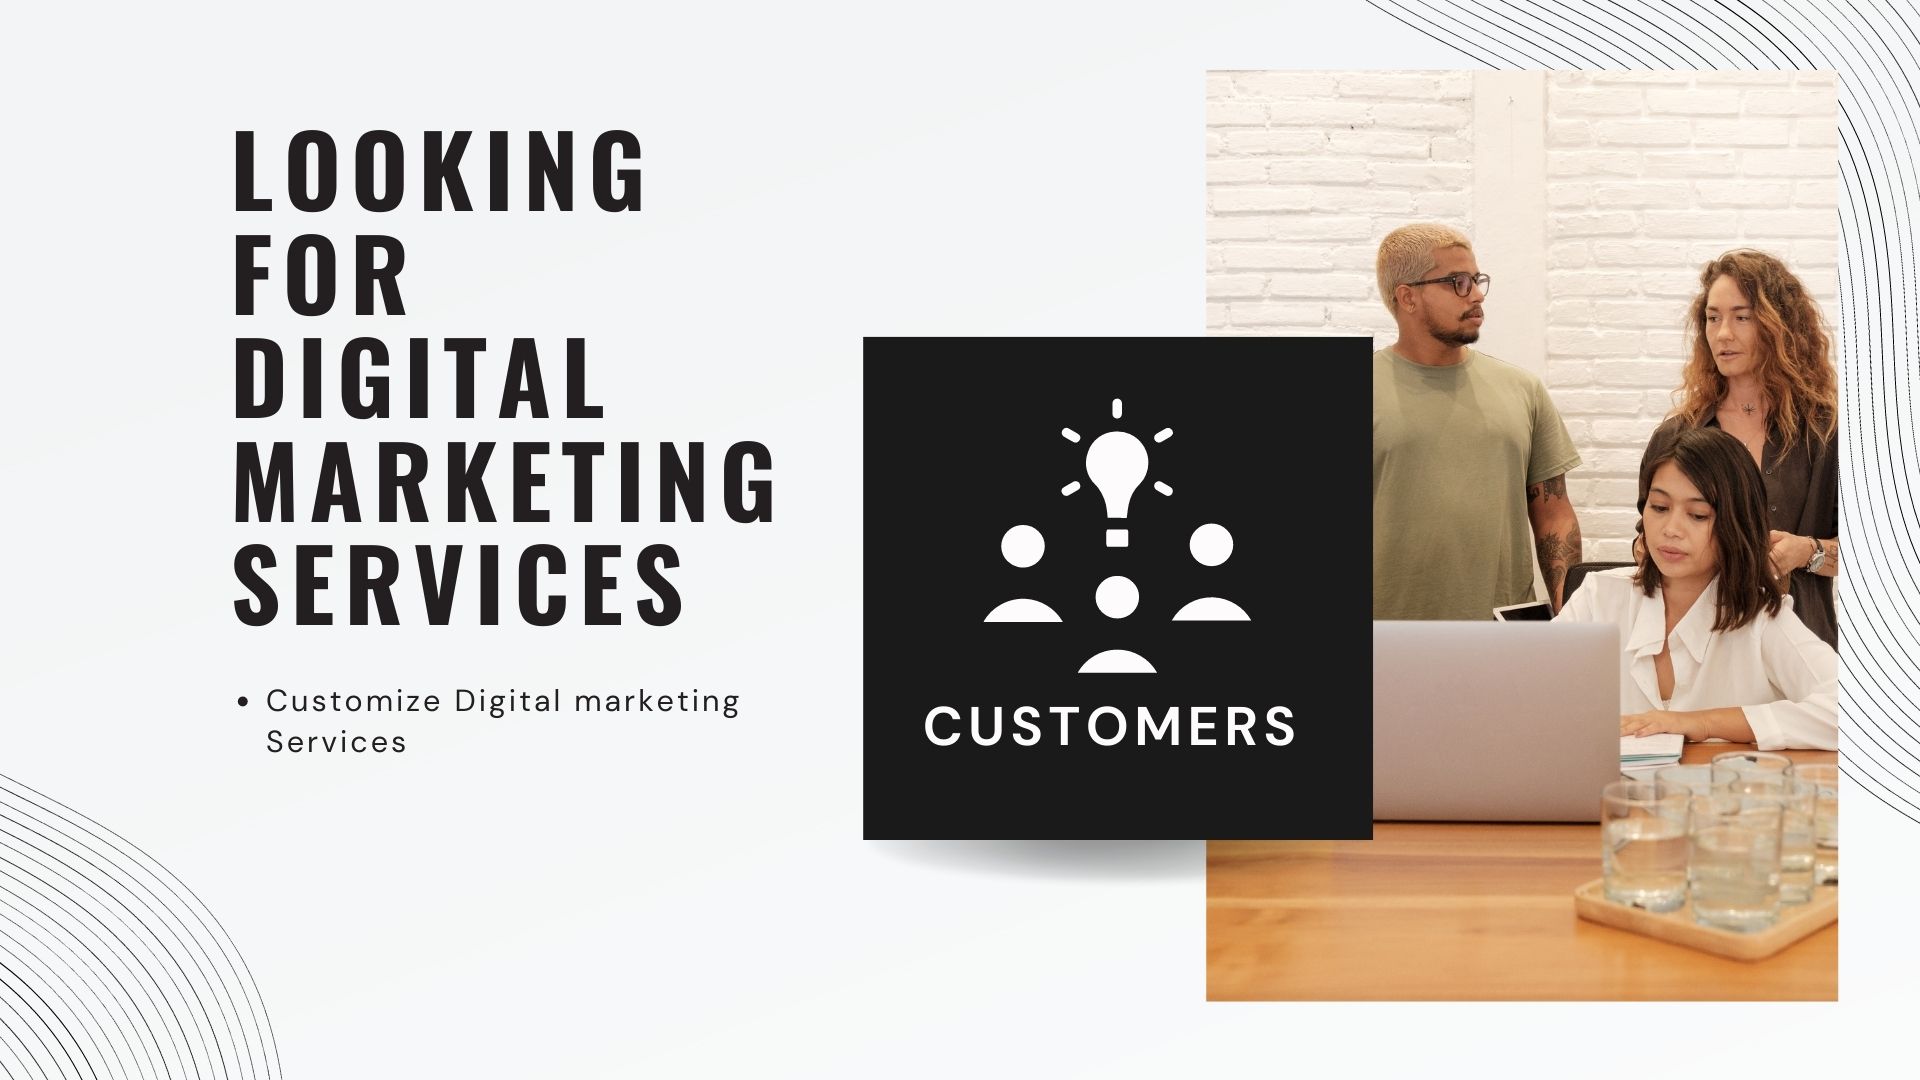 Looking for Digital Marketing services